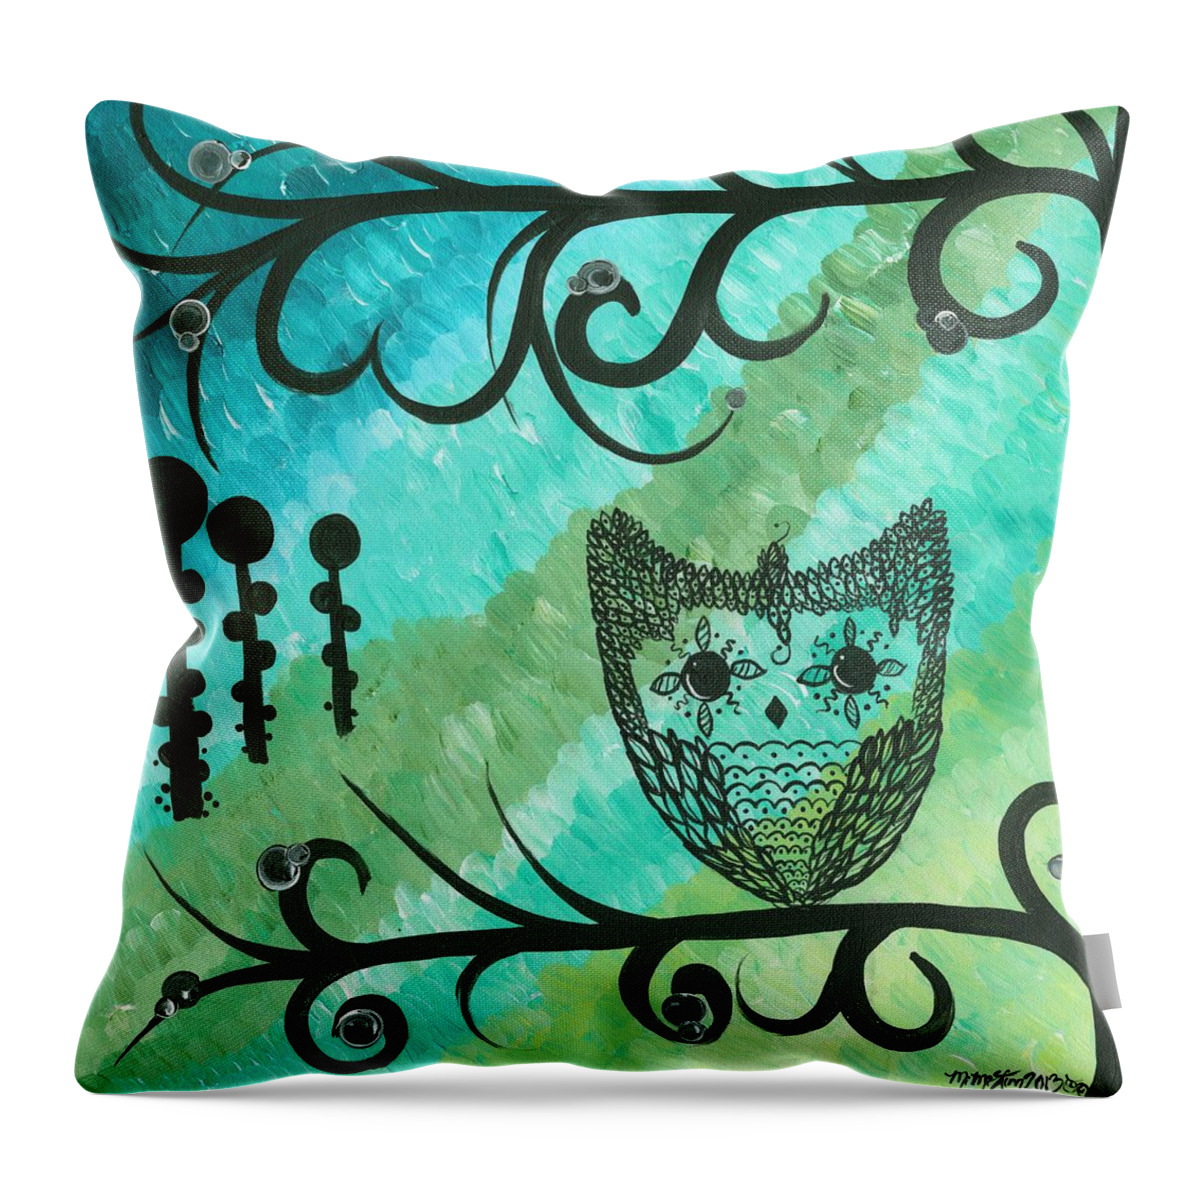 Owls Throw Pillow featuring the painting Hoolandia Contrasts 04 by MiMi Stirn